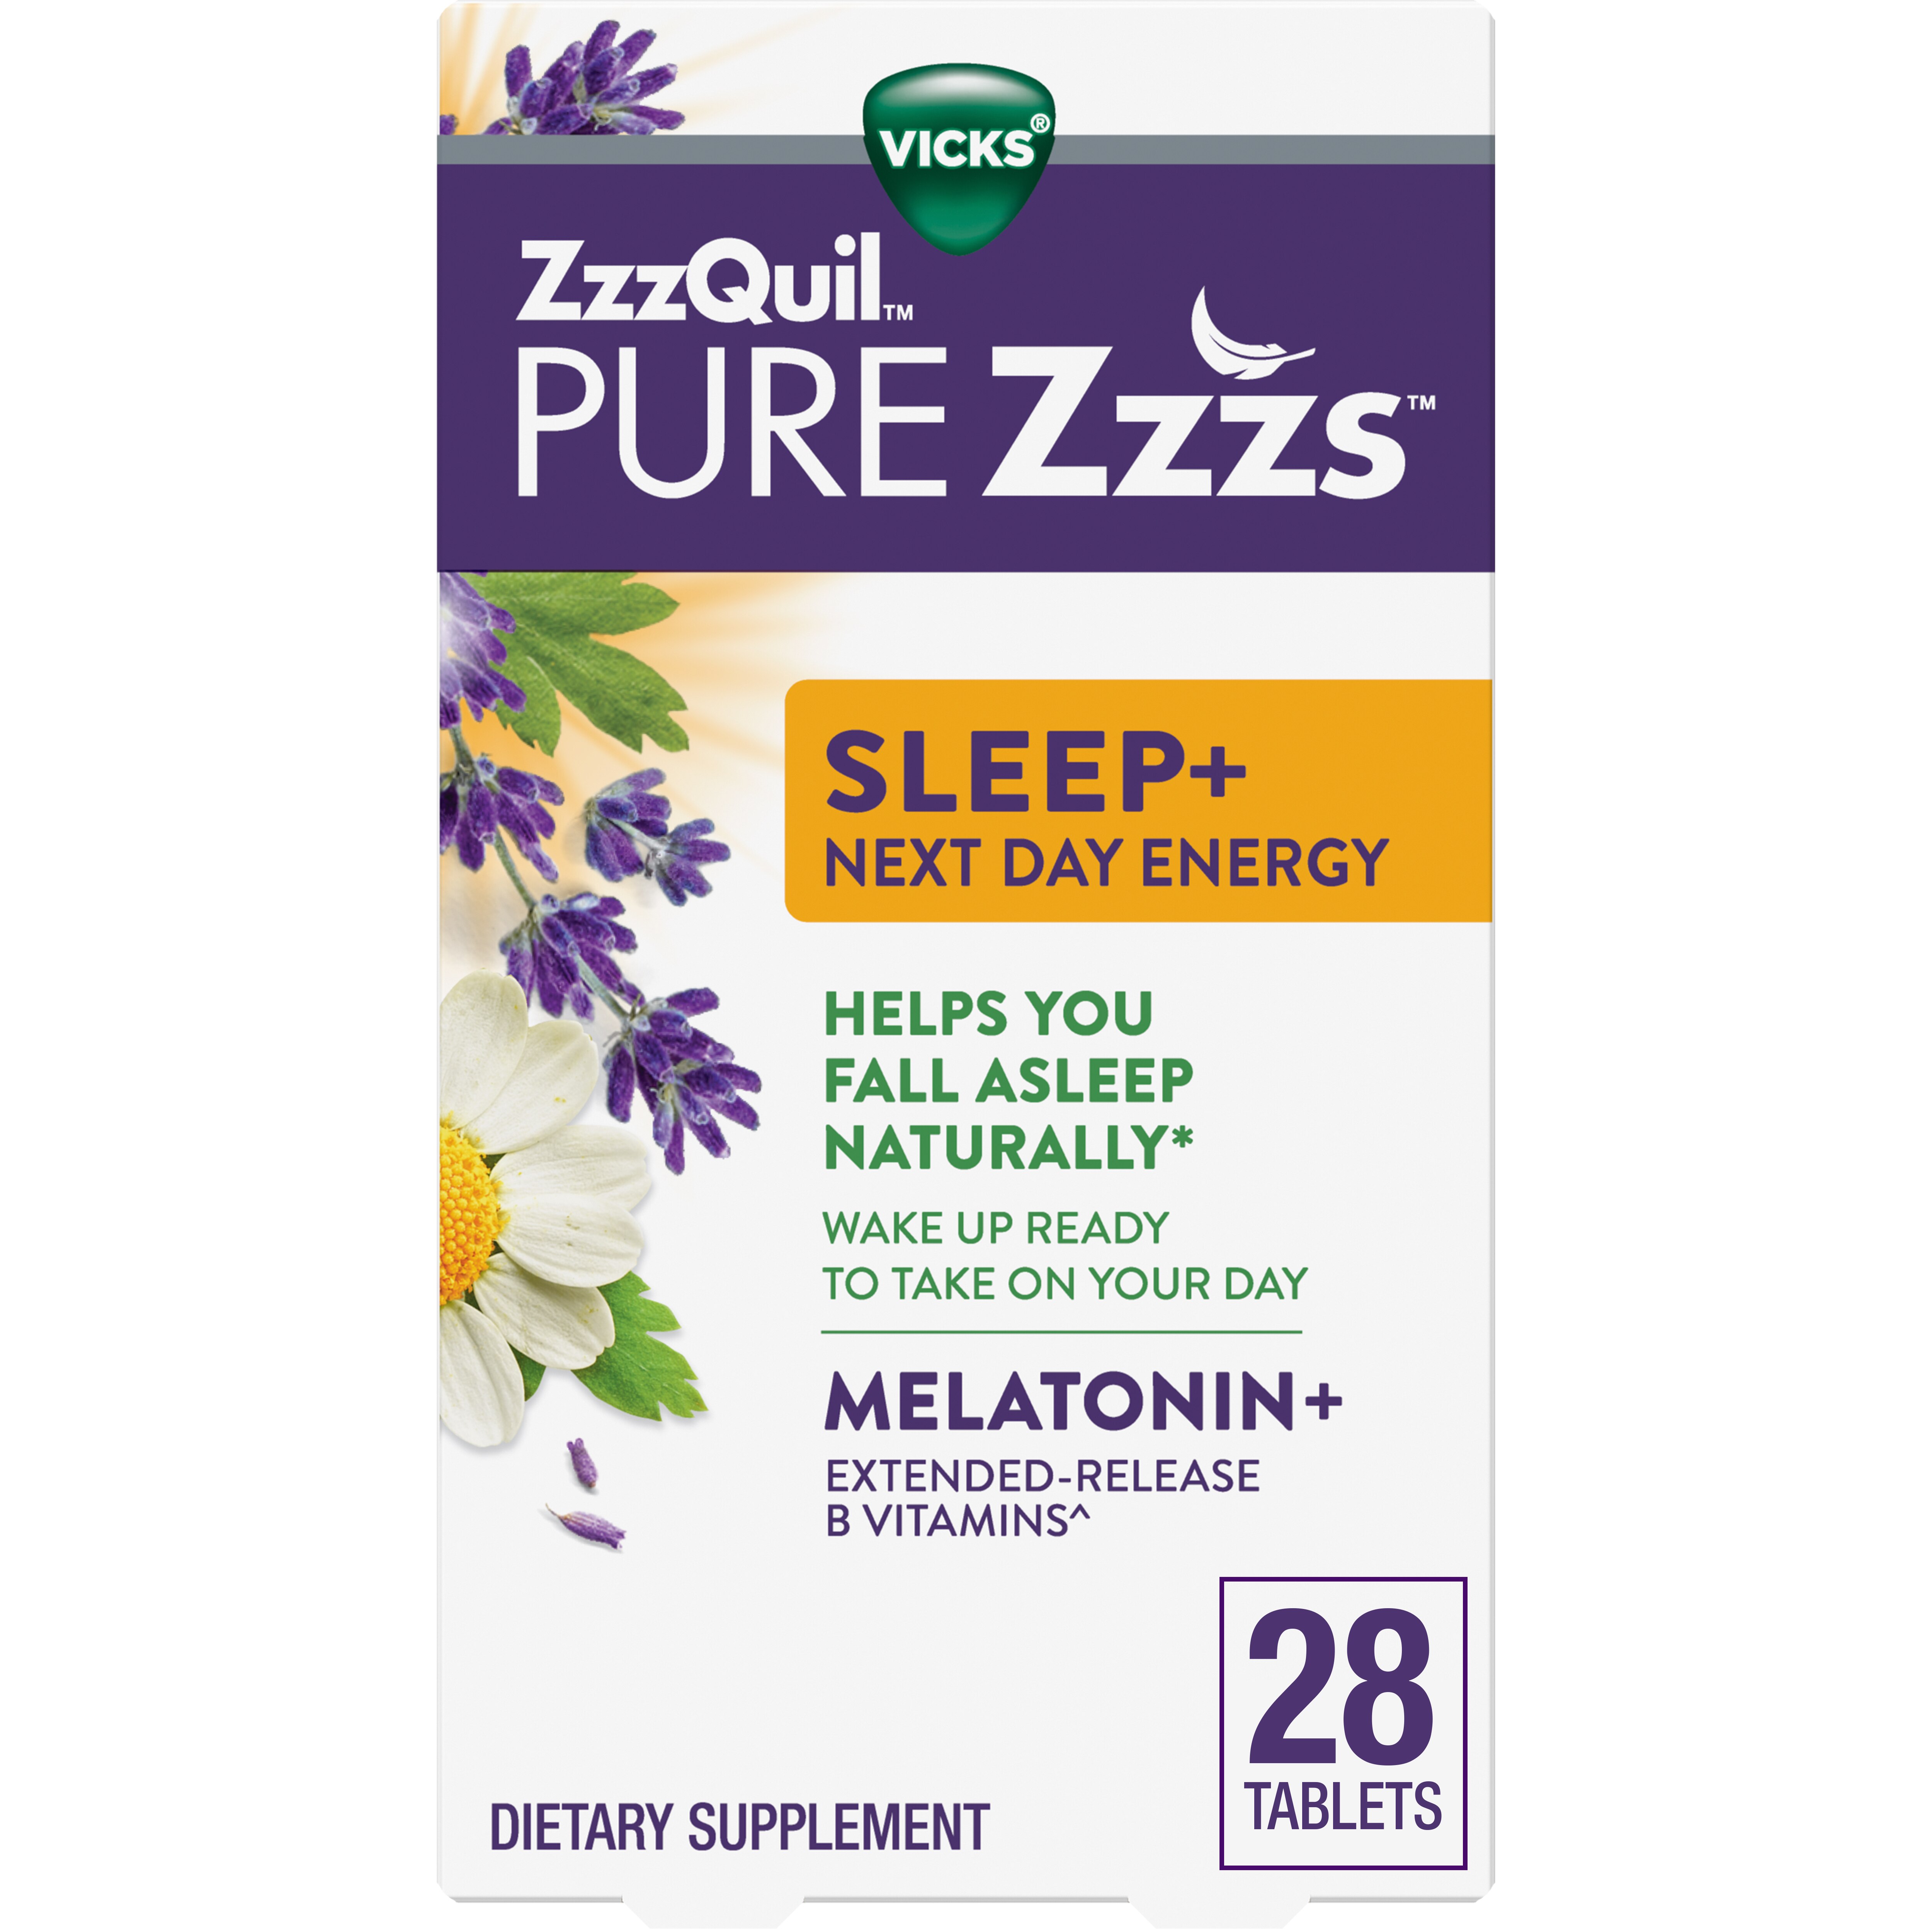 Vicks ZzzQuil PURE Zzzs Sleep+ Next Day Energy Extended Release Tablets, Immediate Release Melatonin, Extended Release B-Vitamins B1, B6, B12, 28 CT